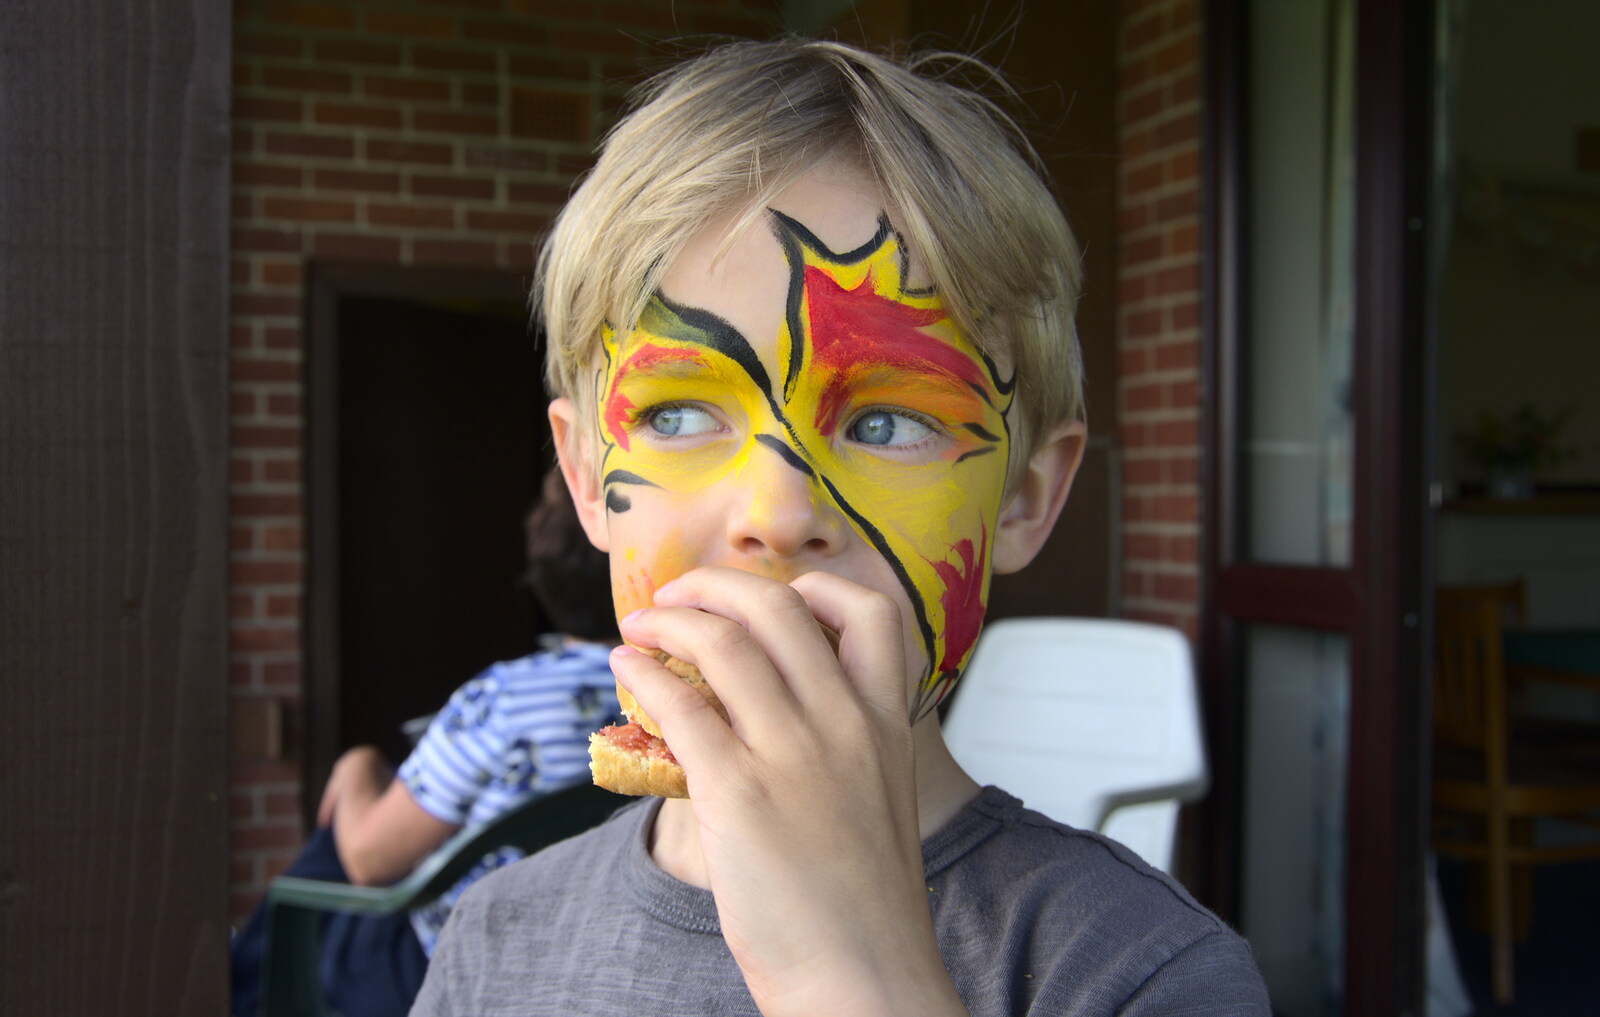 Harry's had some face paint from The Not-Opening of the Palgrave Playground, Palgrave, Suffolk - 3rd June 2018